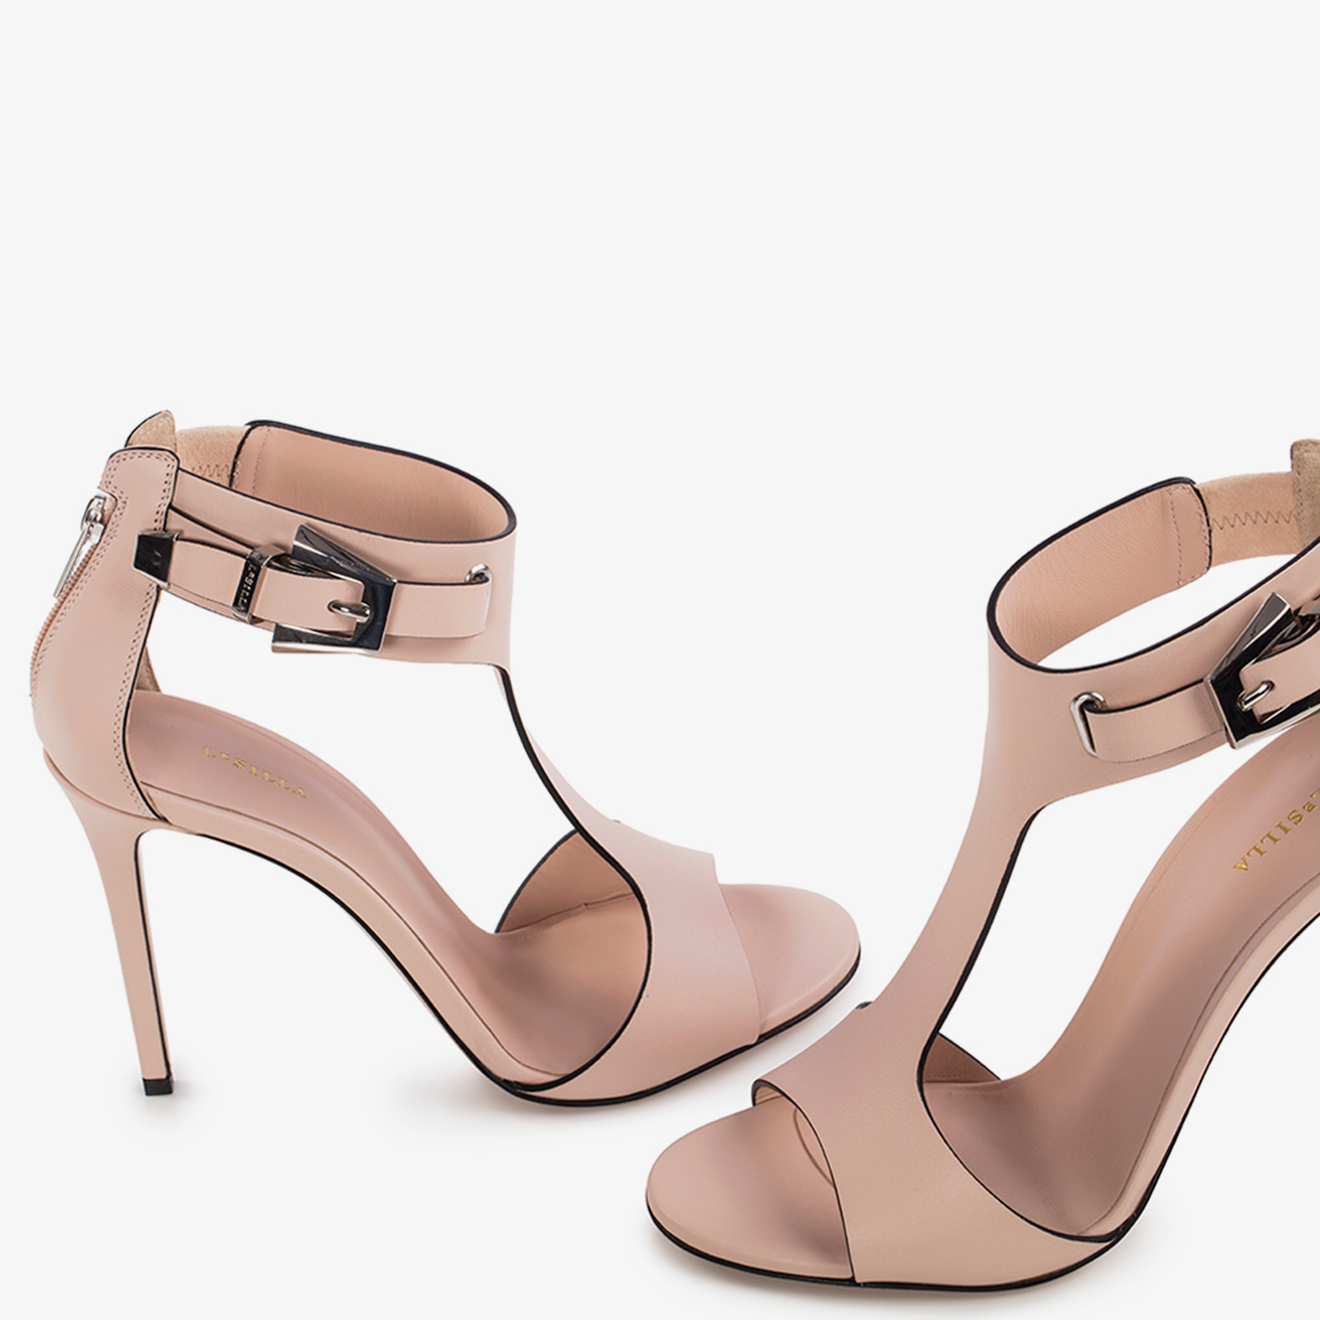 TINA SANDAL 100 mm - Le Silla official outlet